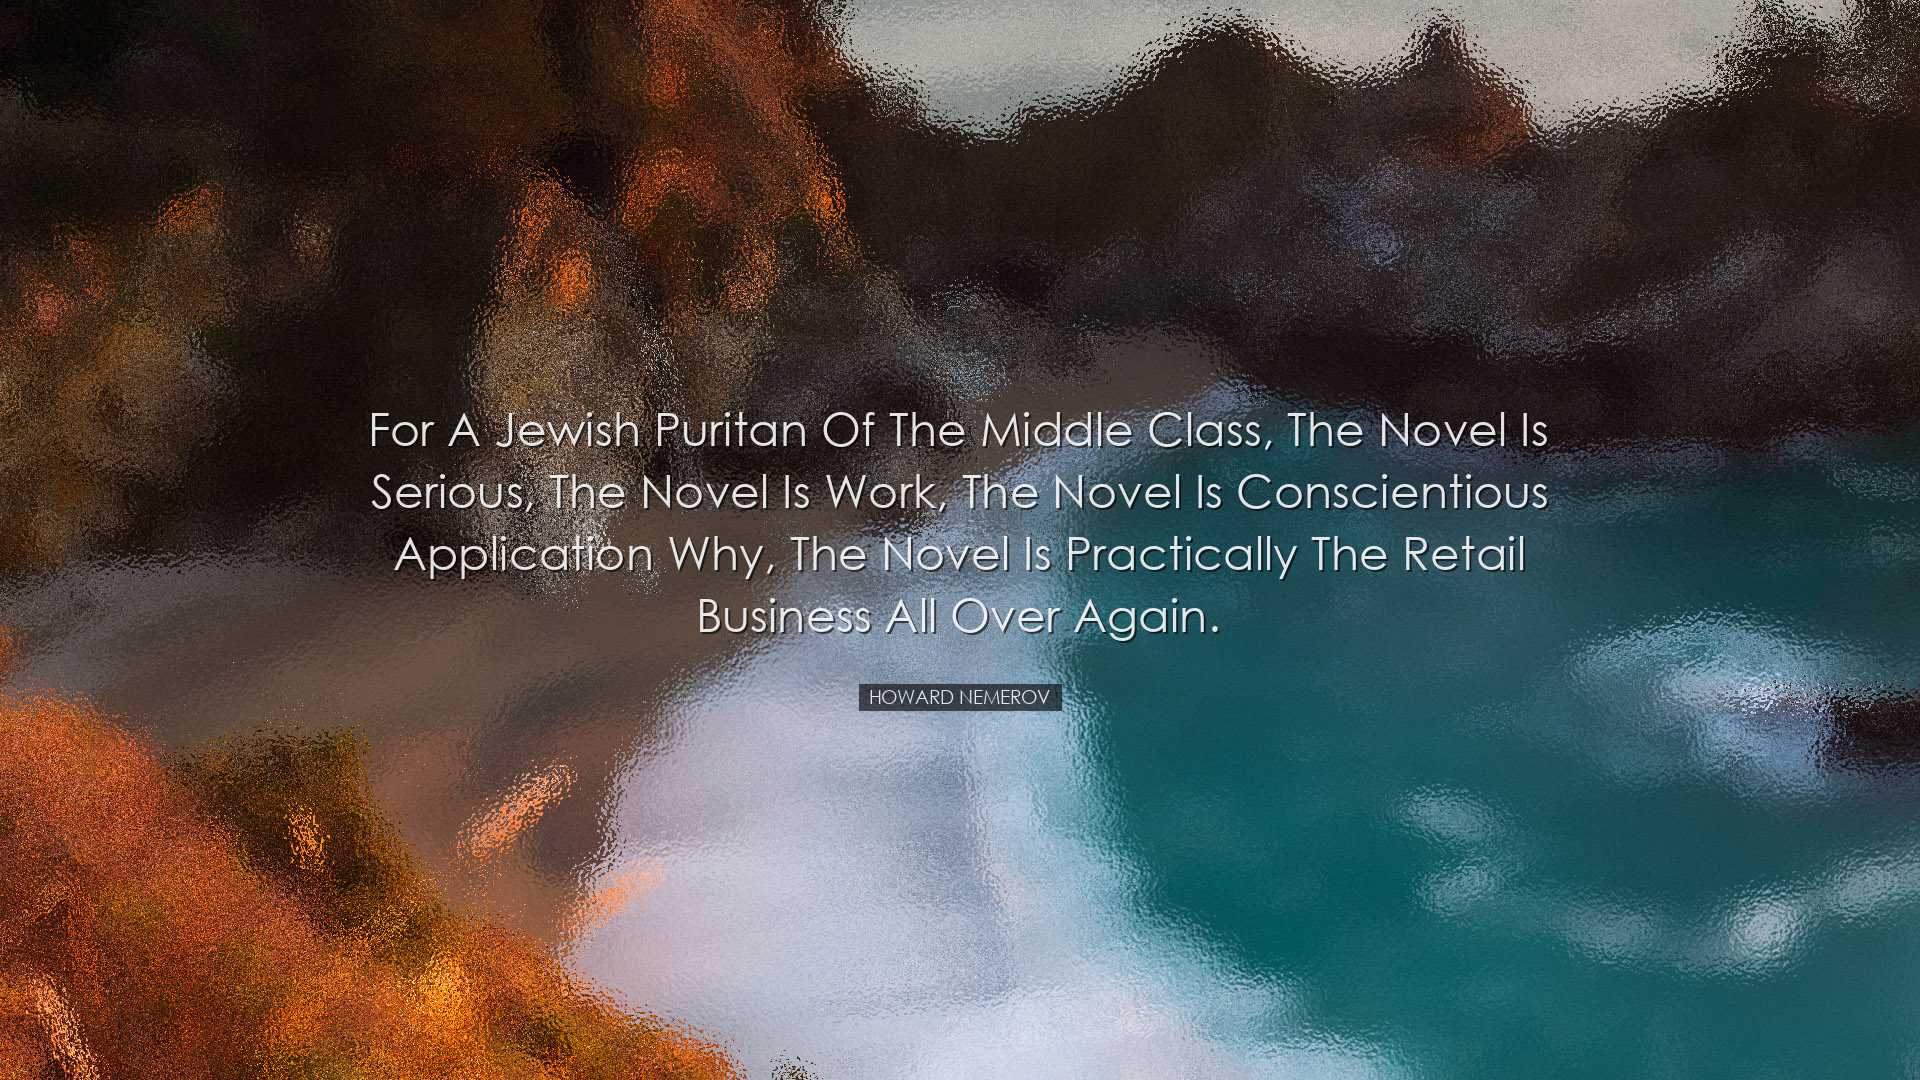 For a Jewish Puritan of the middle class, the novel is serious, th